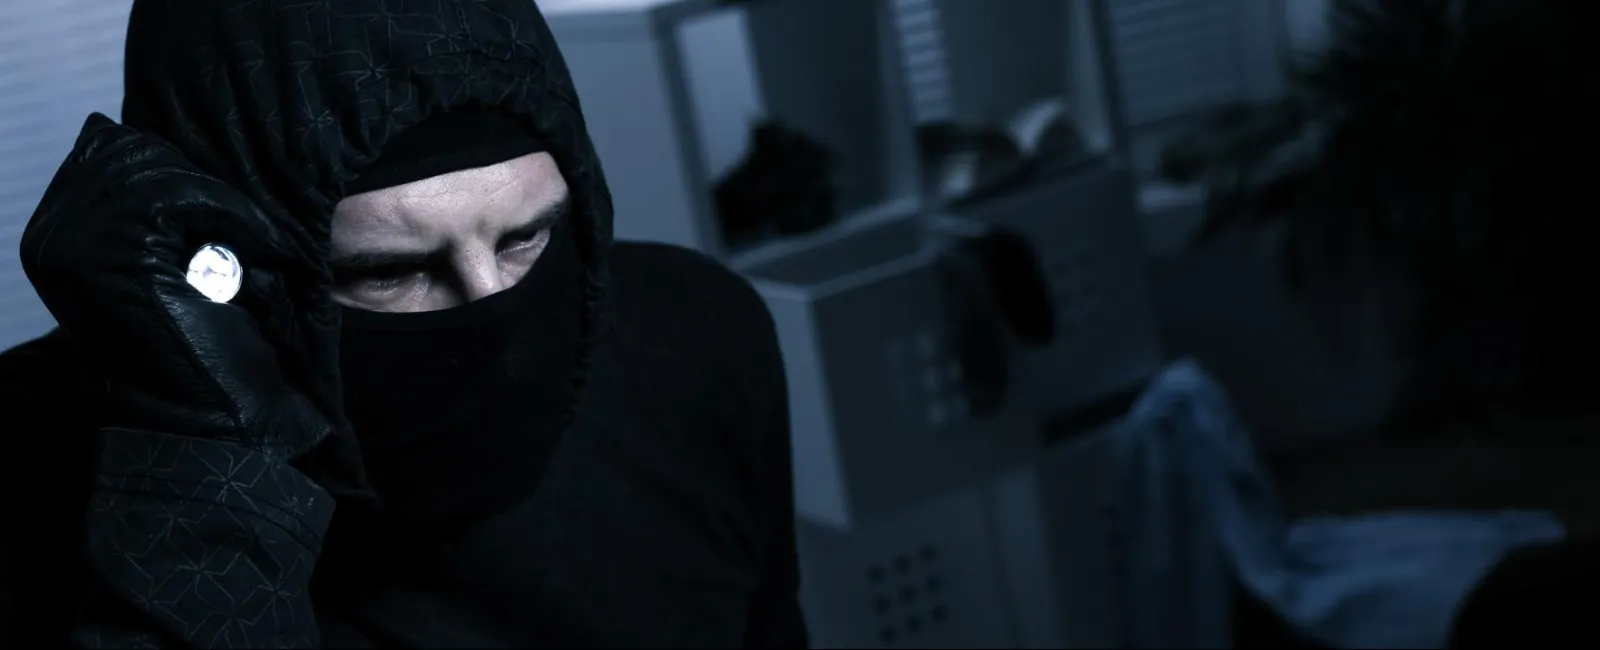 5 Tips Every Business Should Implement to Deter Burglars After Hours